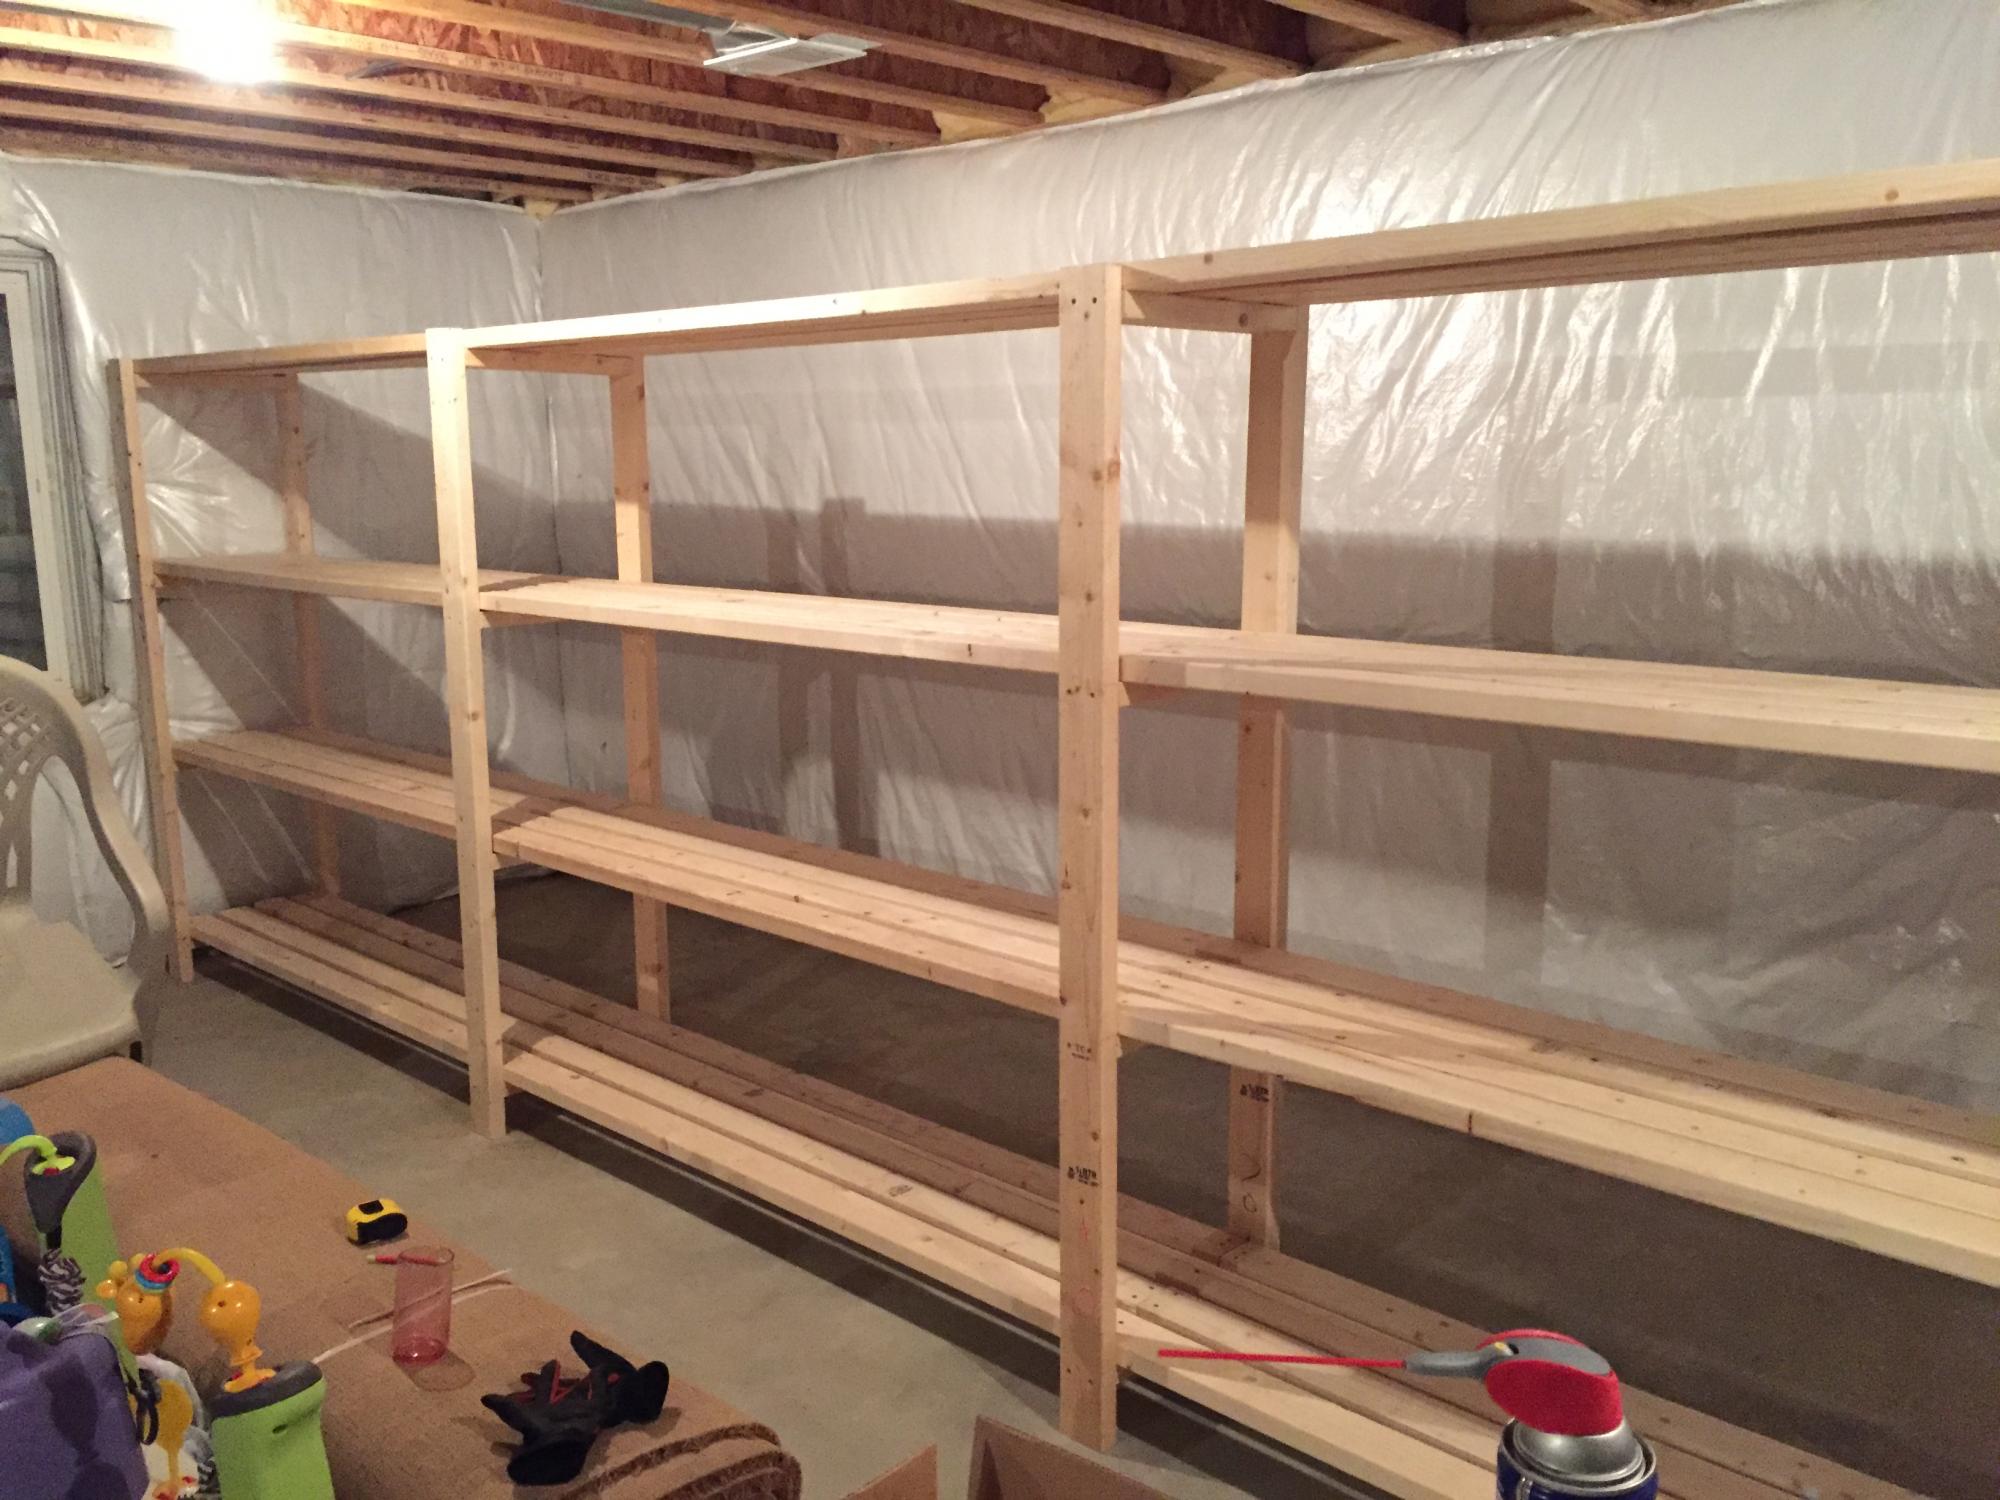 Basement Storage Ana White, How To Build Basement Shelves From 2×4 S